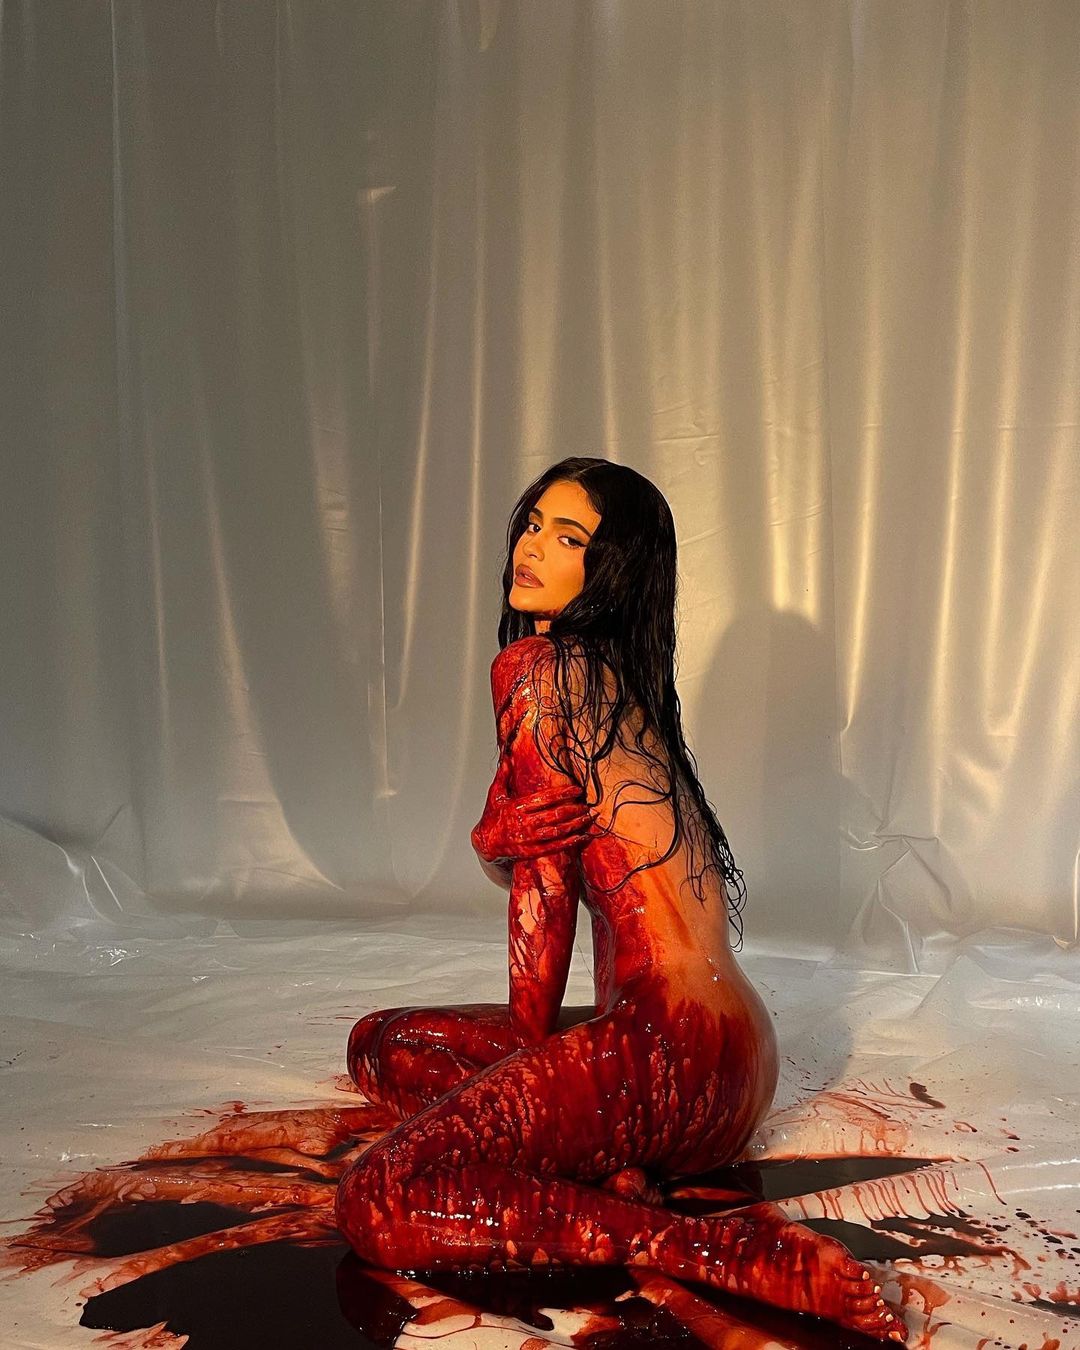 Kylie Jenner criticized for her 'disturbing' nude and bloody photos